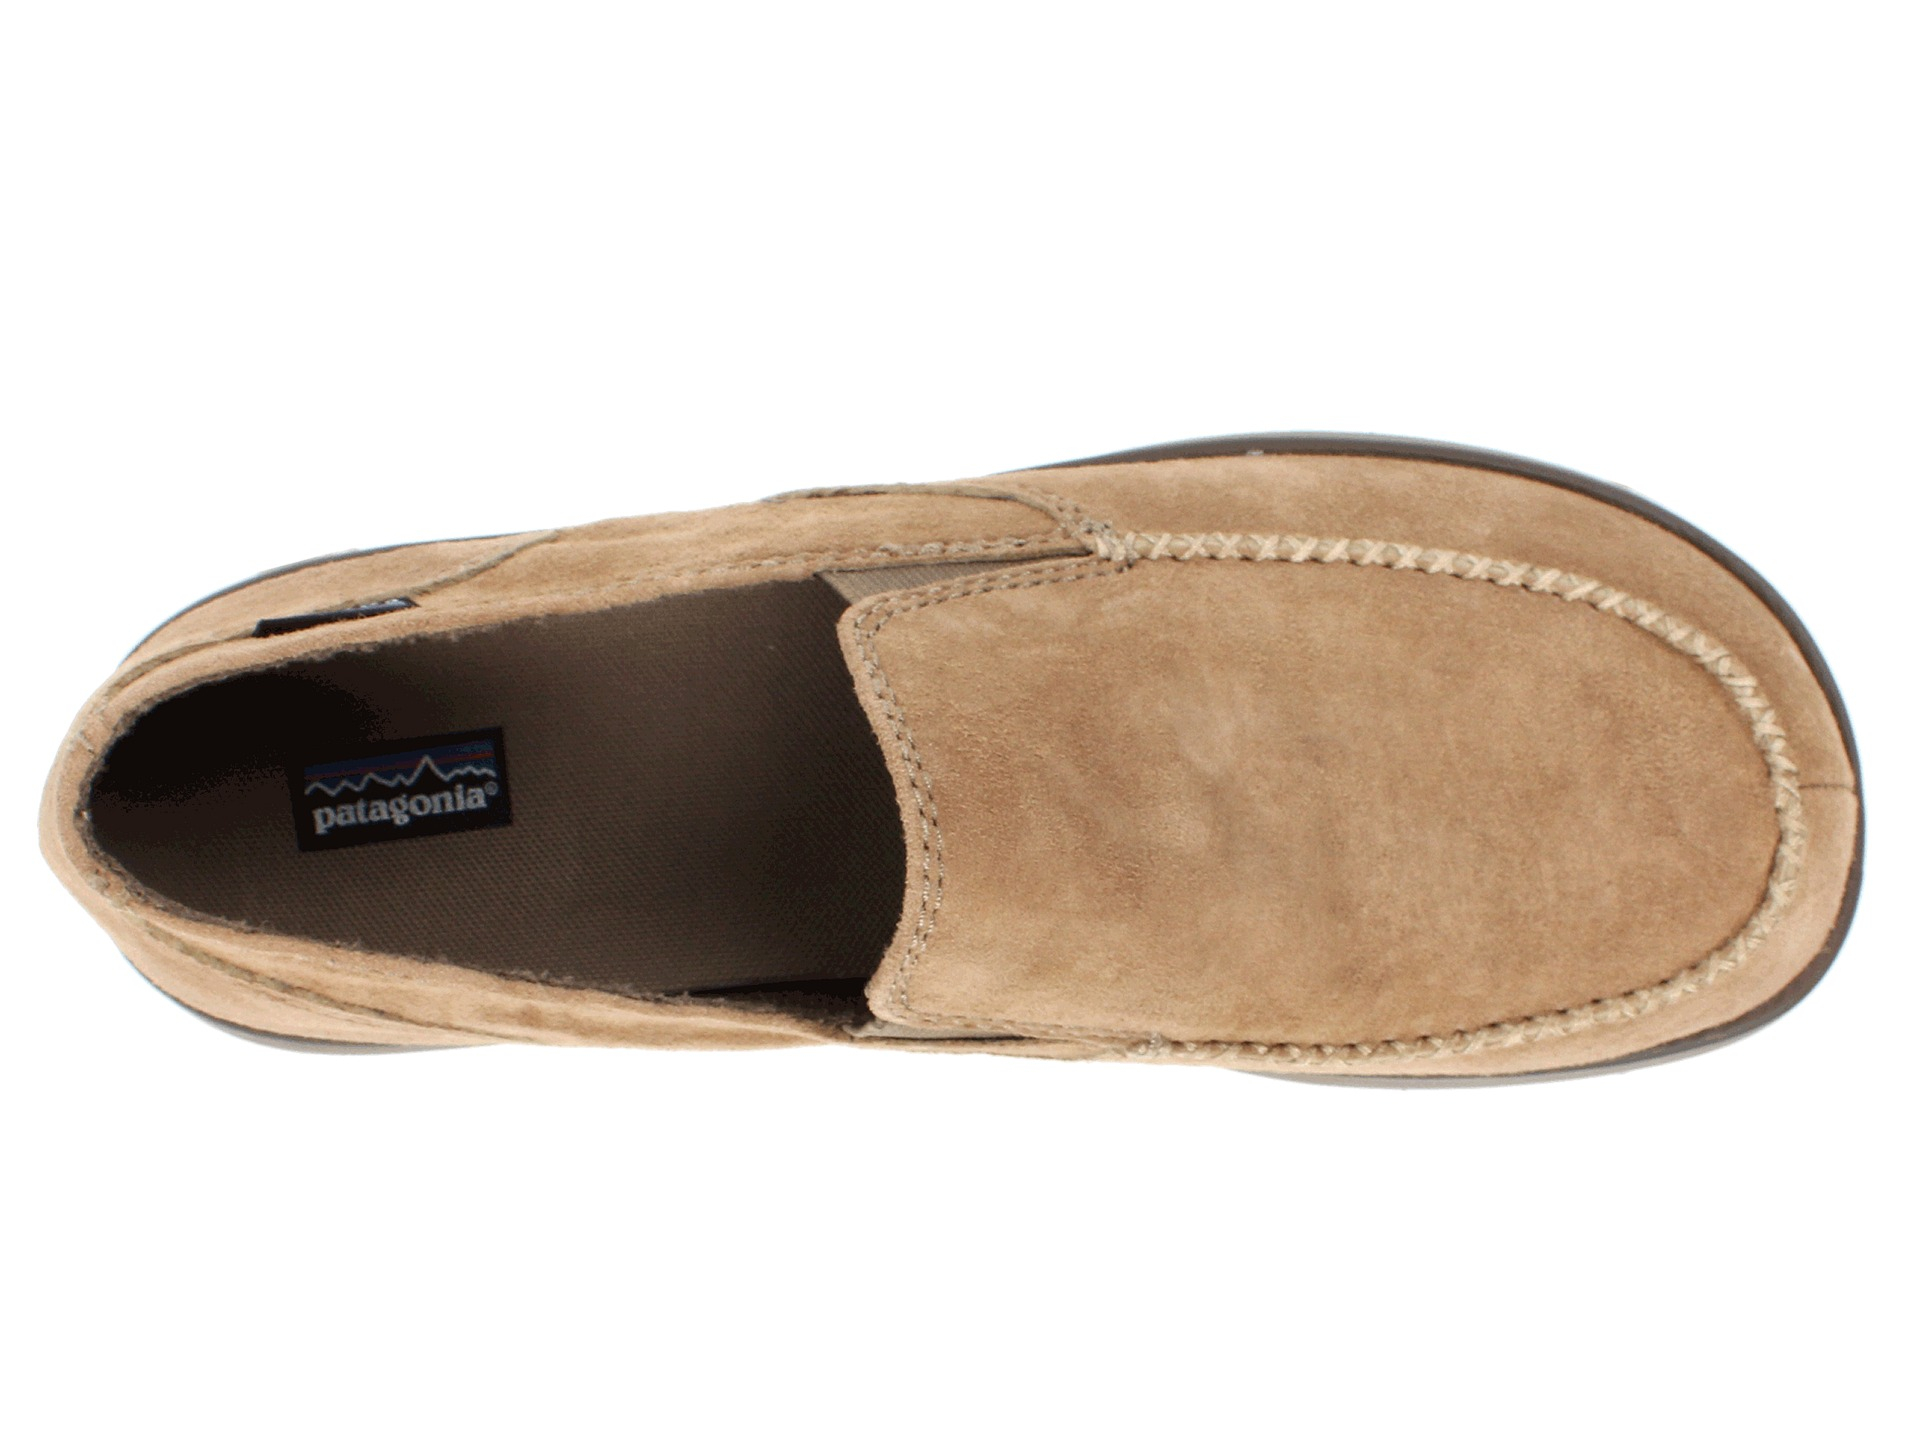 Patagonia Maui Smooth in Natural for Men - Lyst